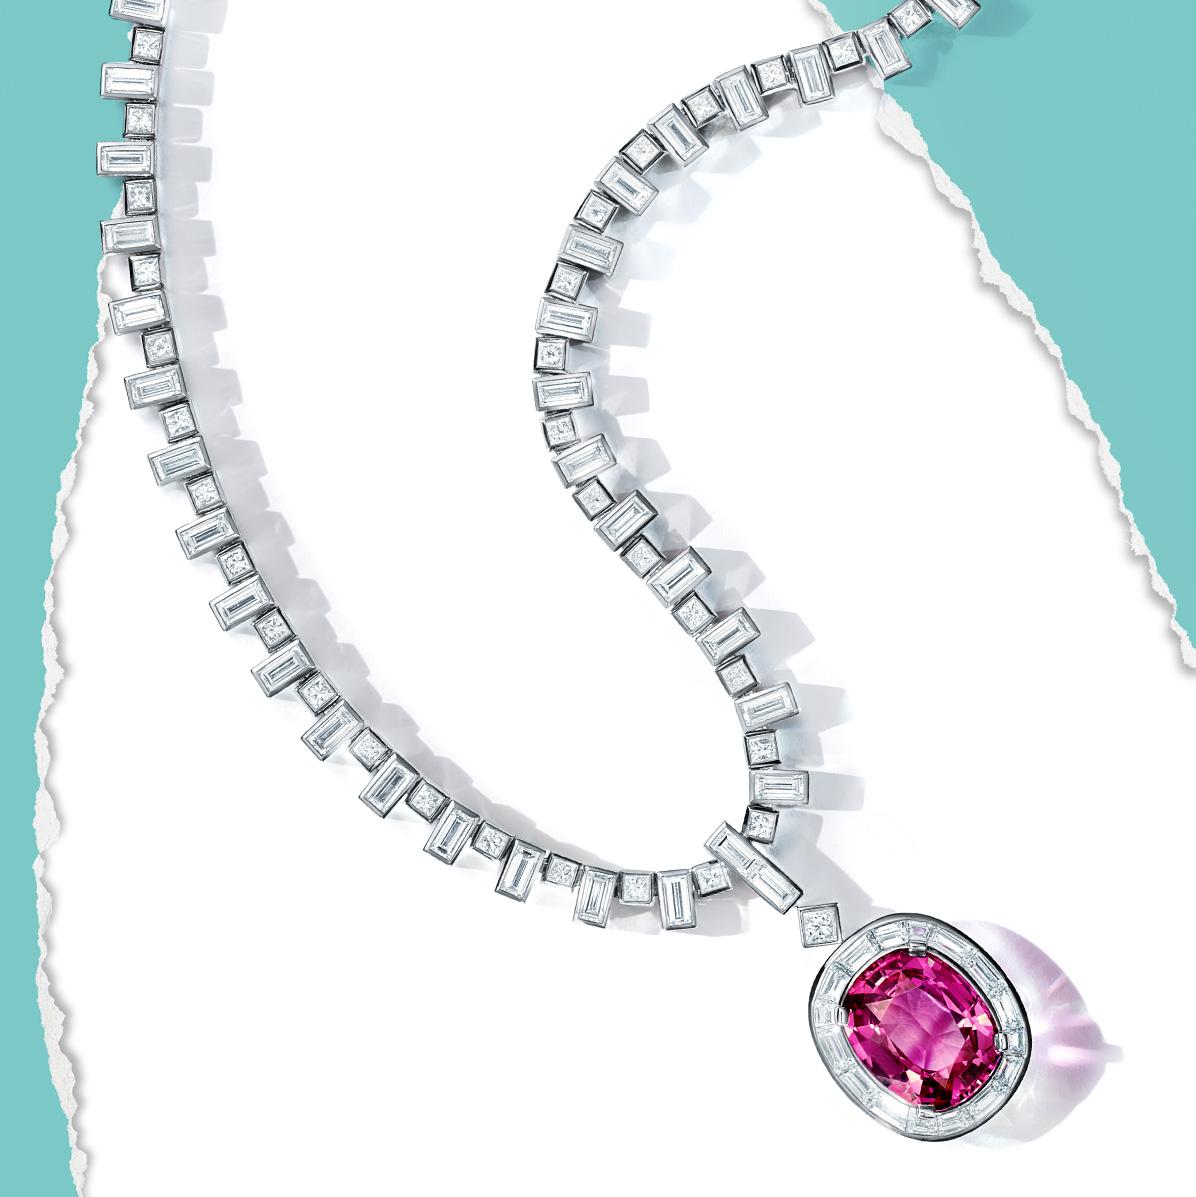 Tiffany & Co. on X: Designed by Chief Artistic Officer #ReedKrakoff for  the Extraordinary Tiffany: High Jewelry Collection Spring 2020, this  necklace features a cushion-cut pink spinel pendant of over 20 carats